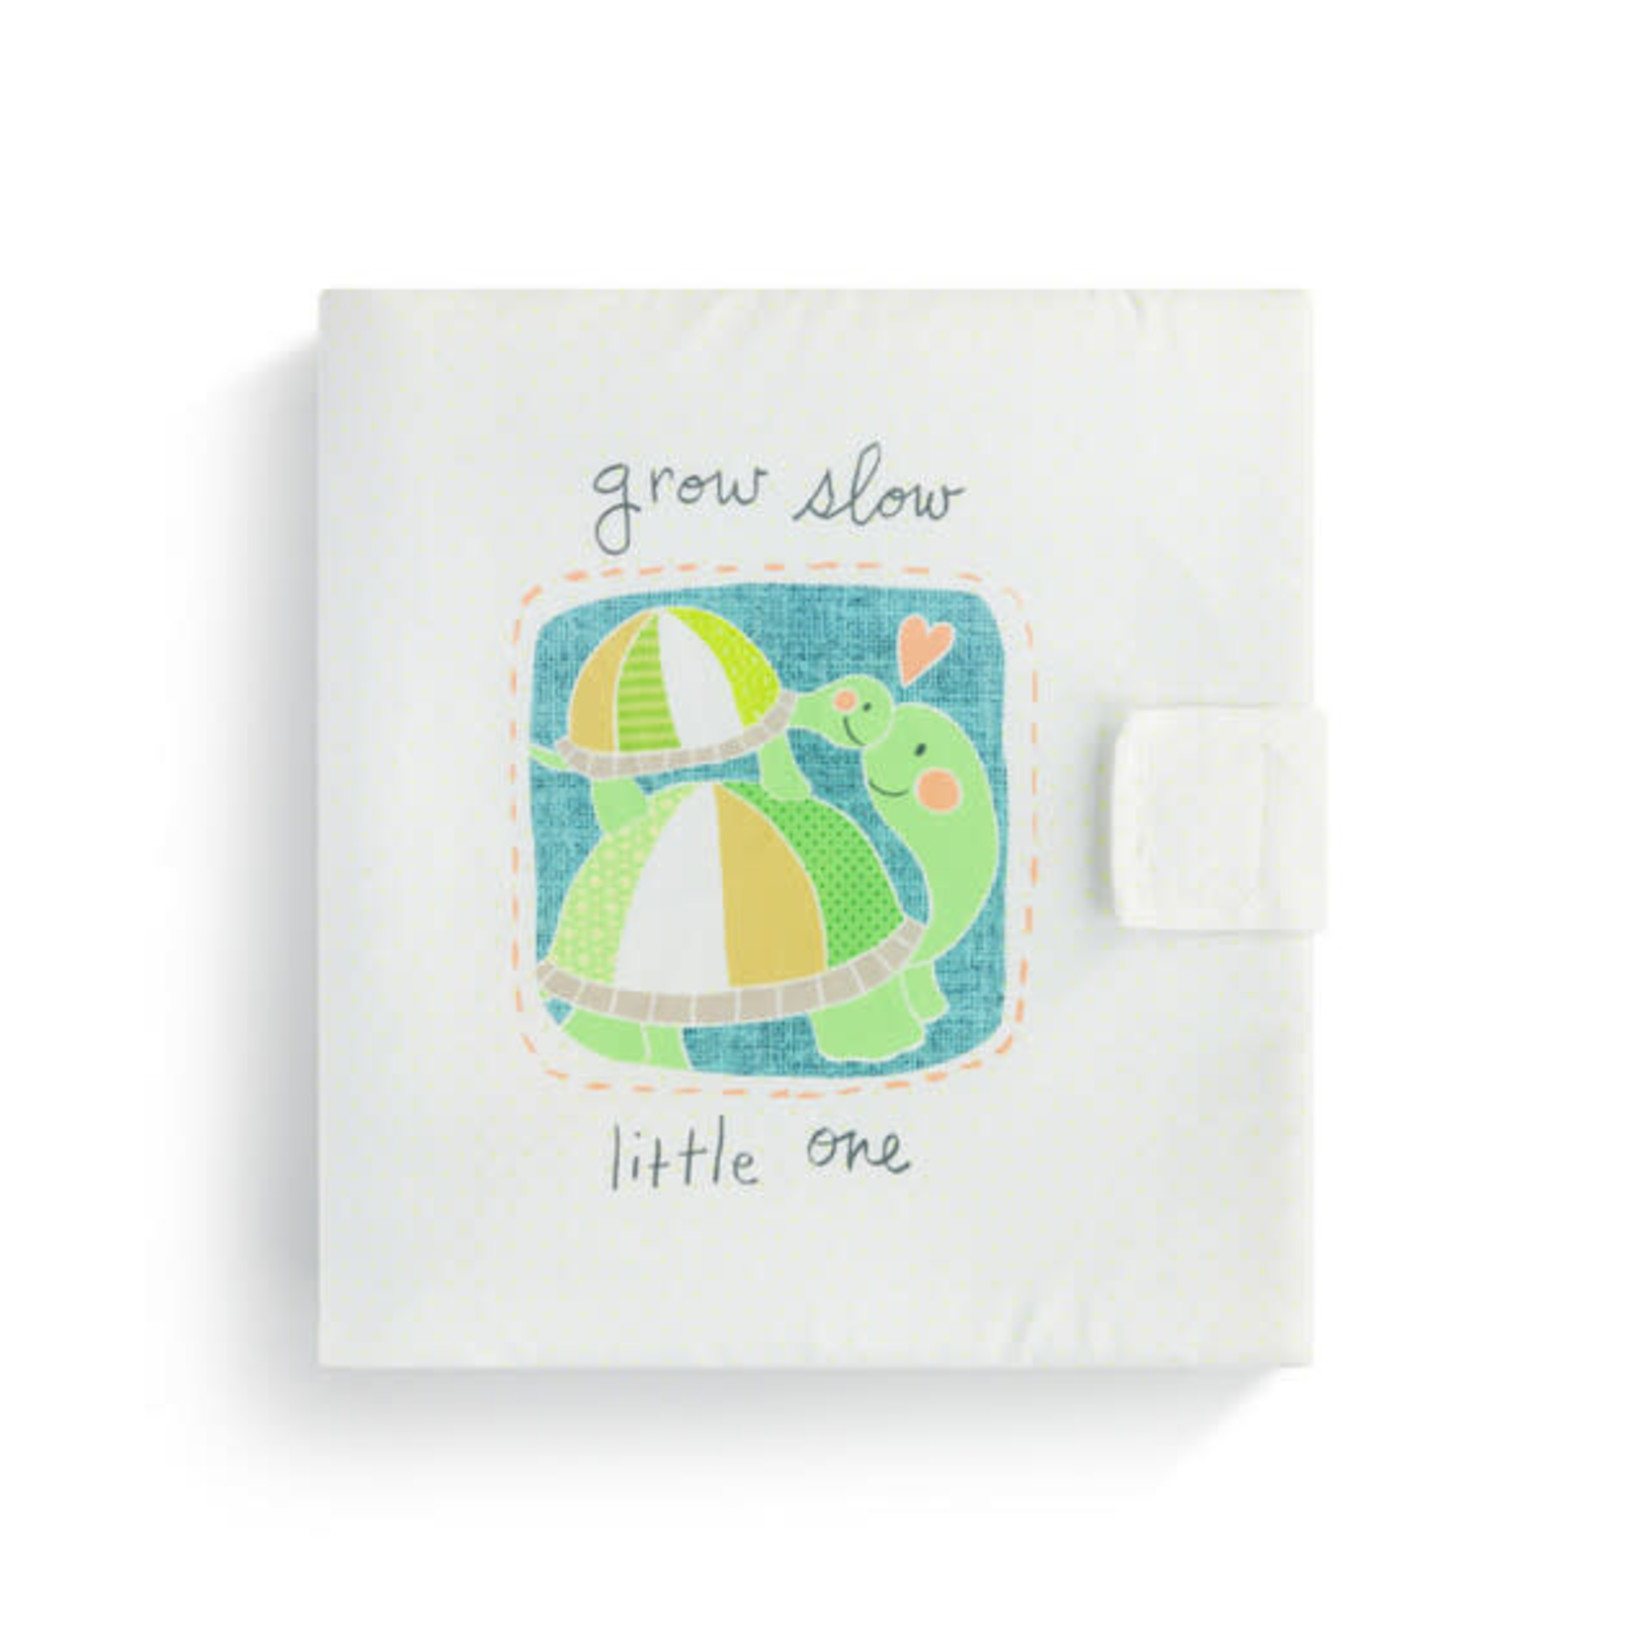 "GROW SLOW LITTLE ONE" TURTLE BOOK